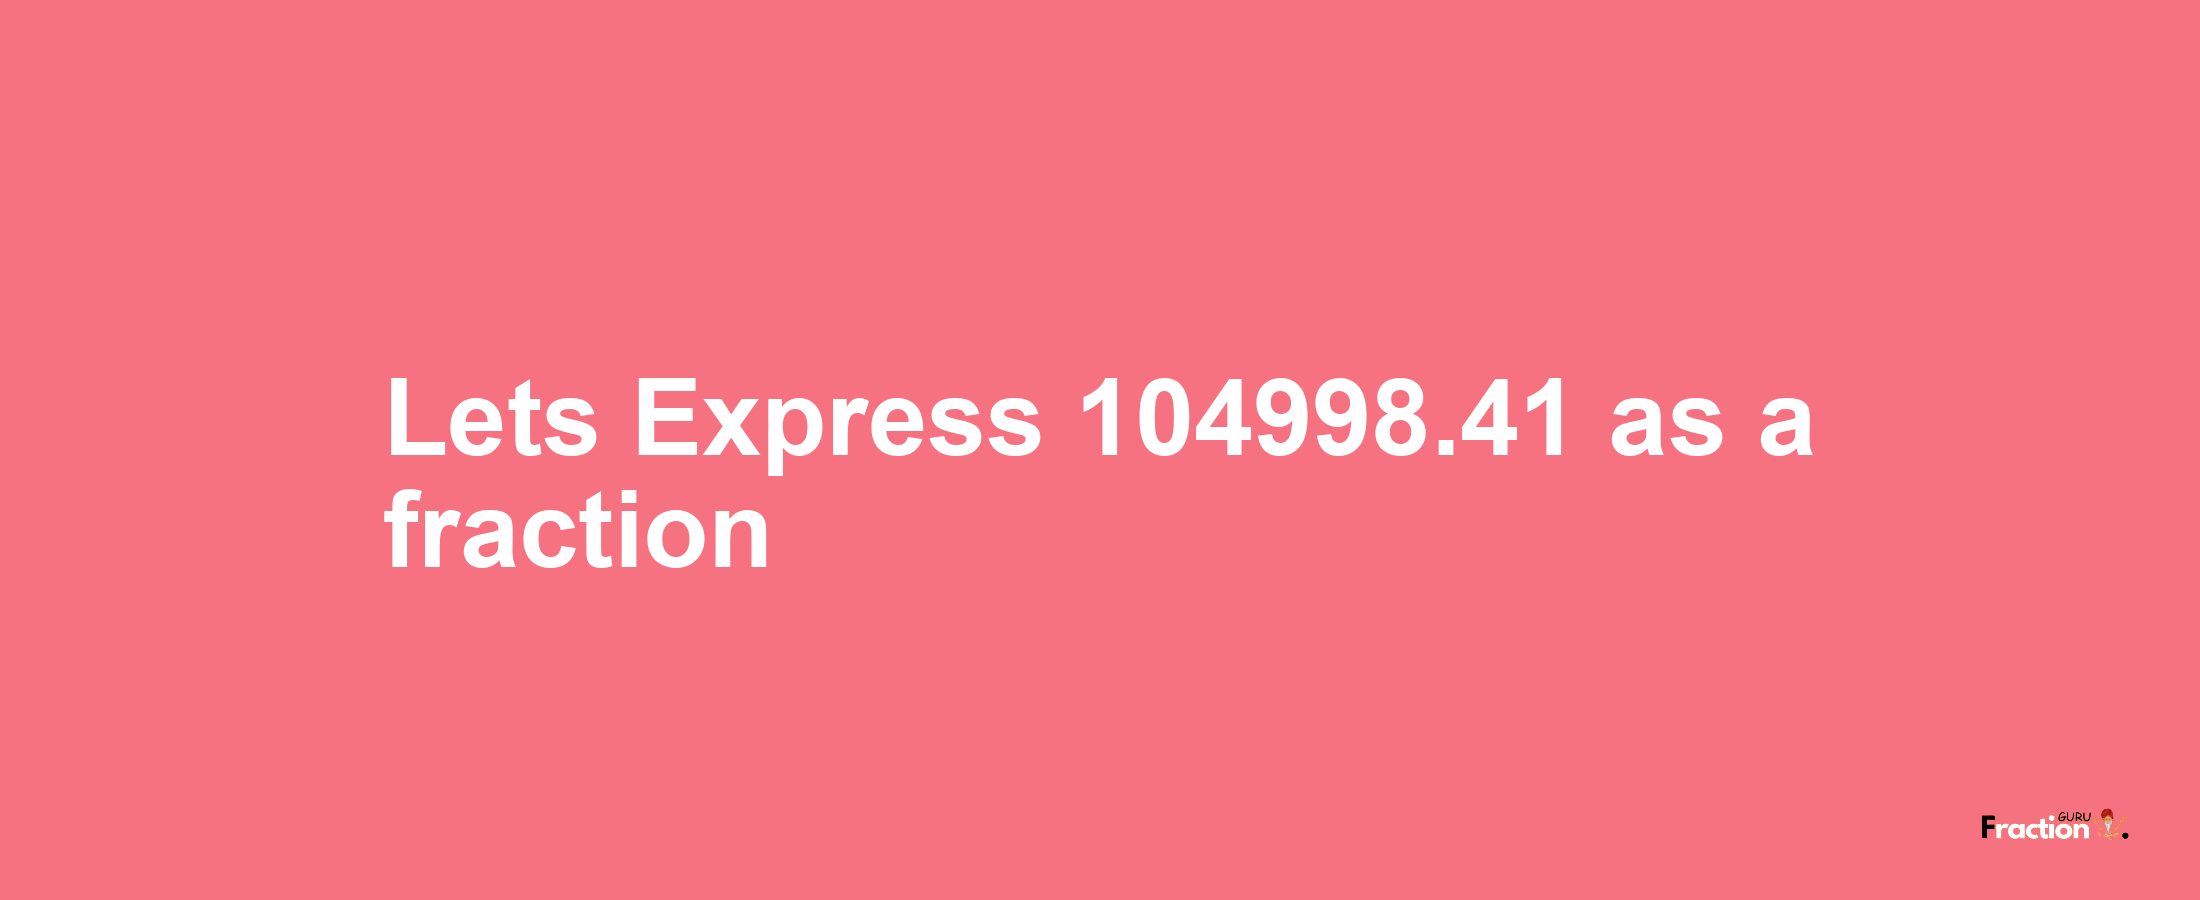 Lets Express 104998.41 as afraction